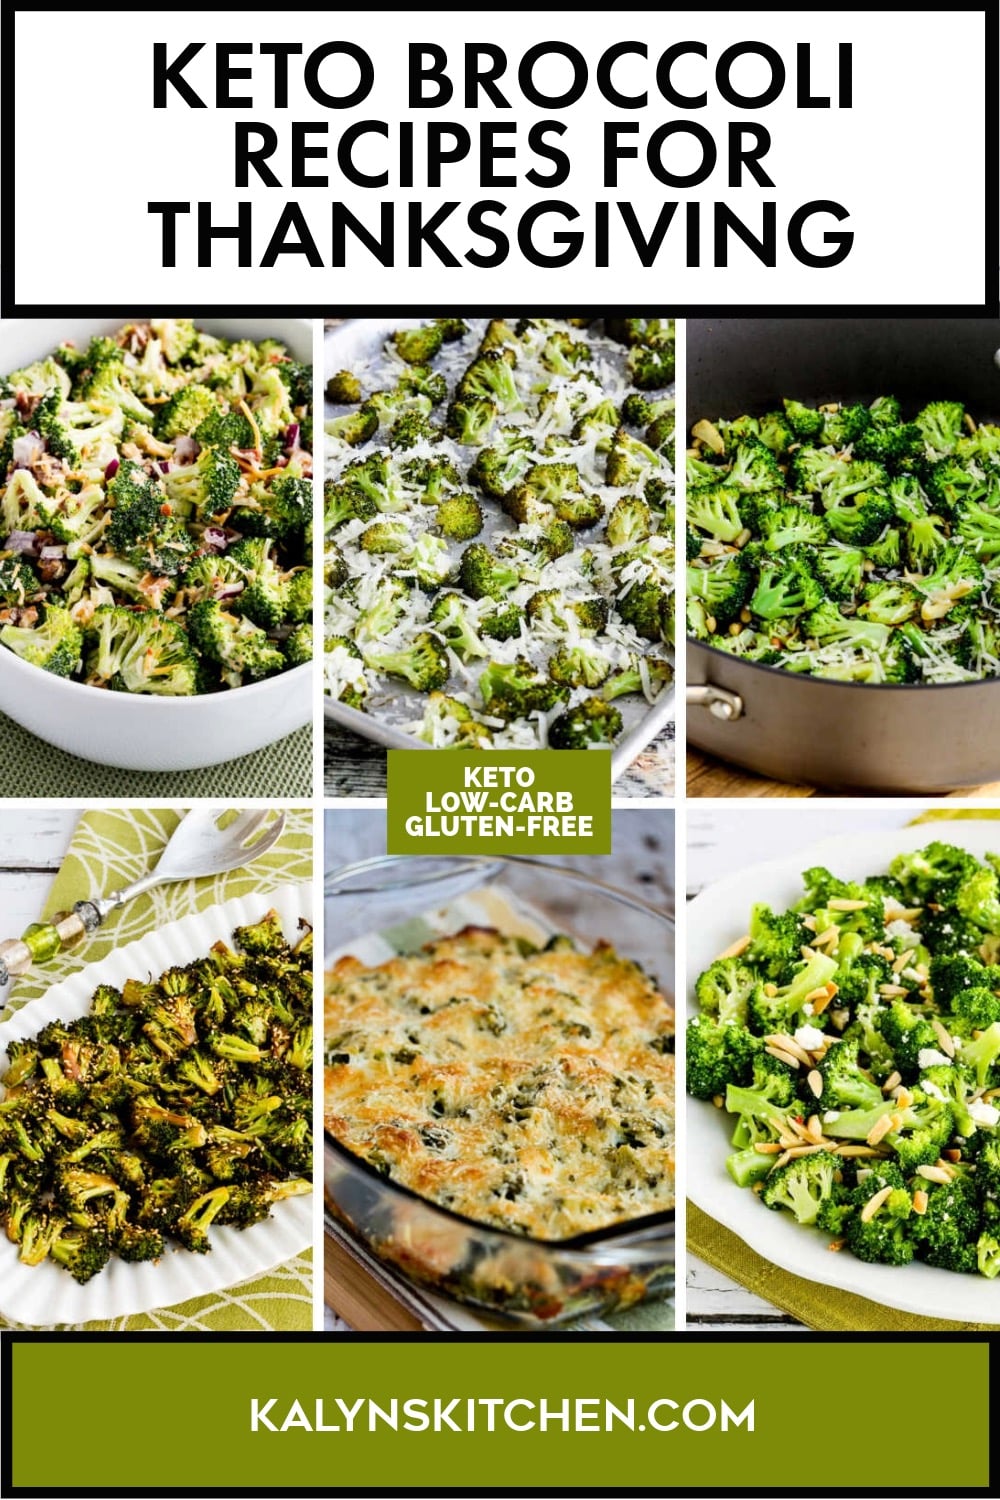 Pinterest image of Keto Broccoli Recipes for Thanksgiving